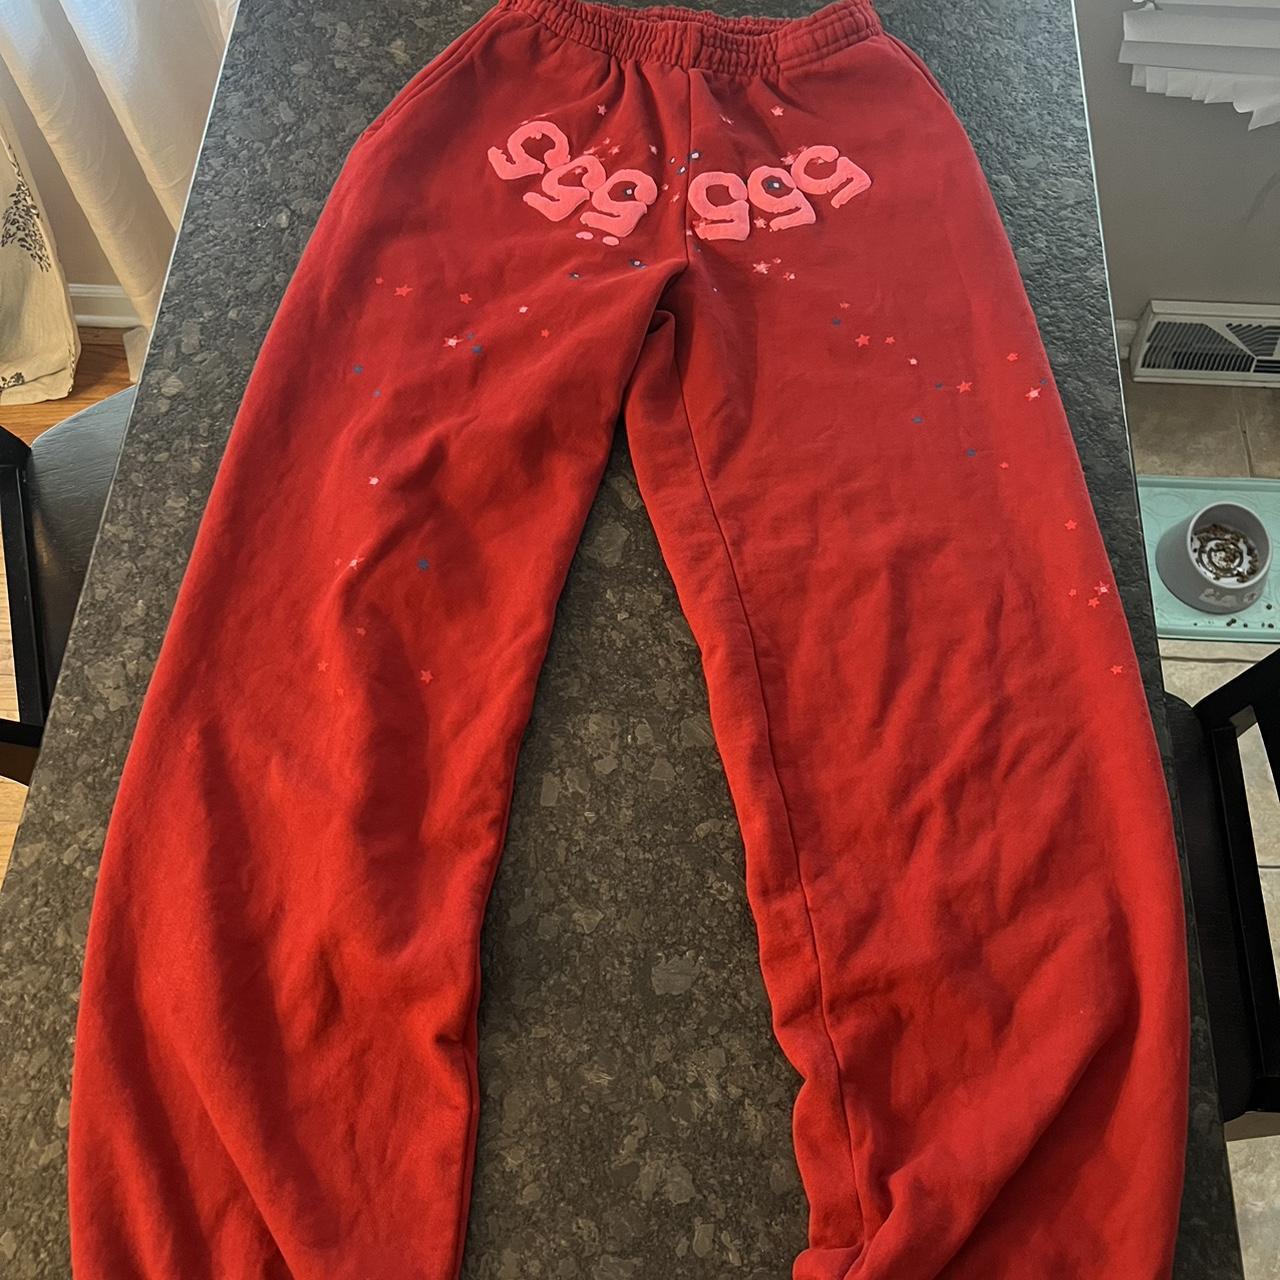 Sp5der Red Sweatpants | Worn twice and open to... - Depop